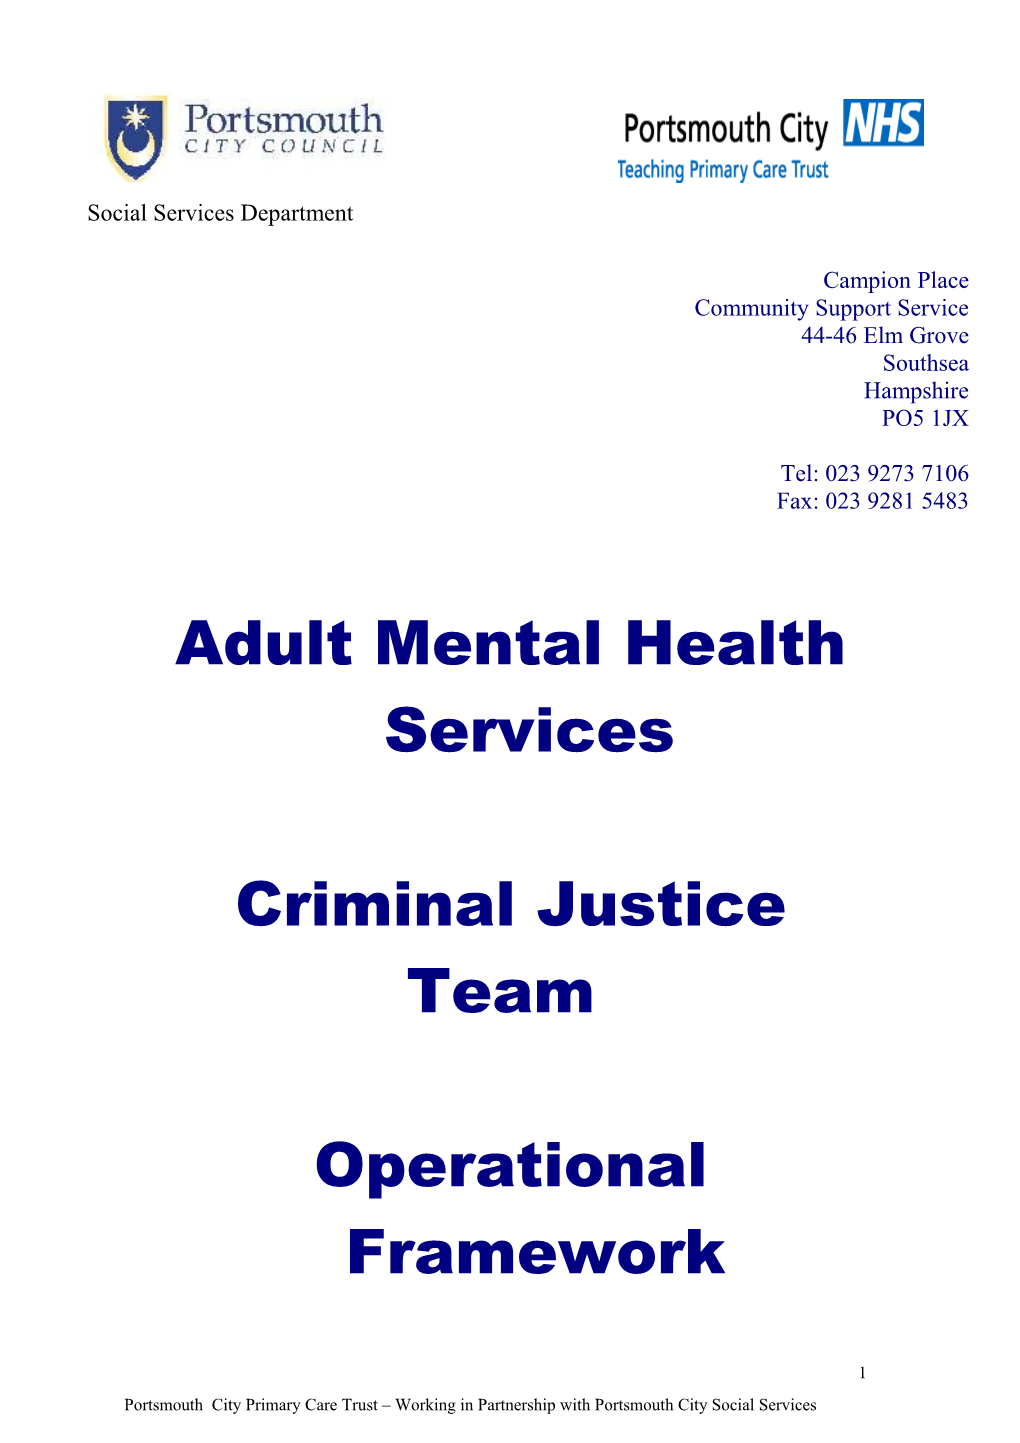 Adult Mental Health Services s2